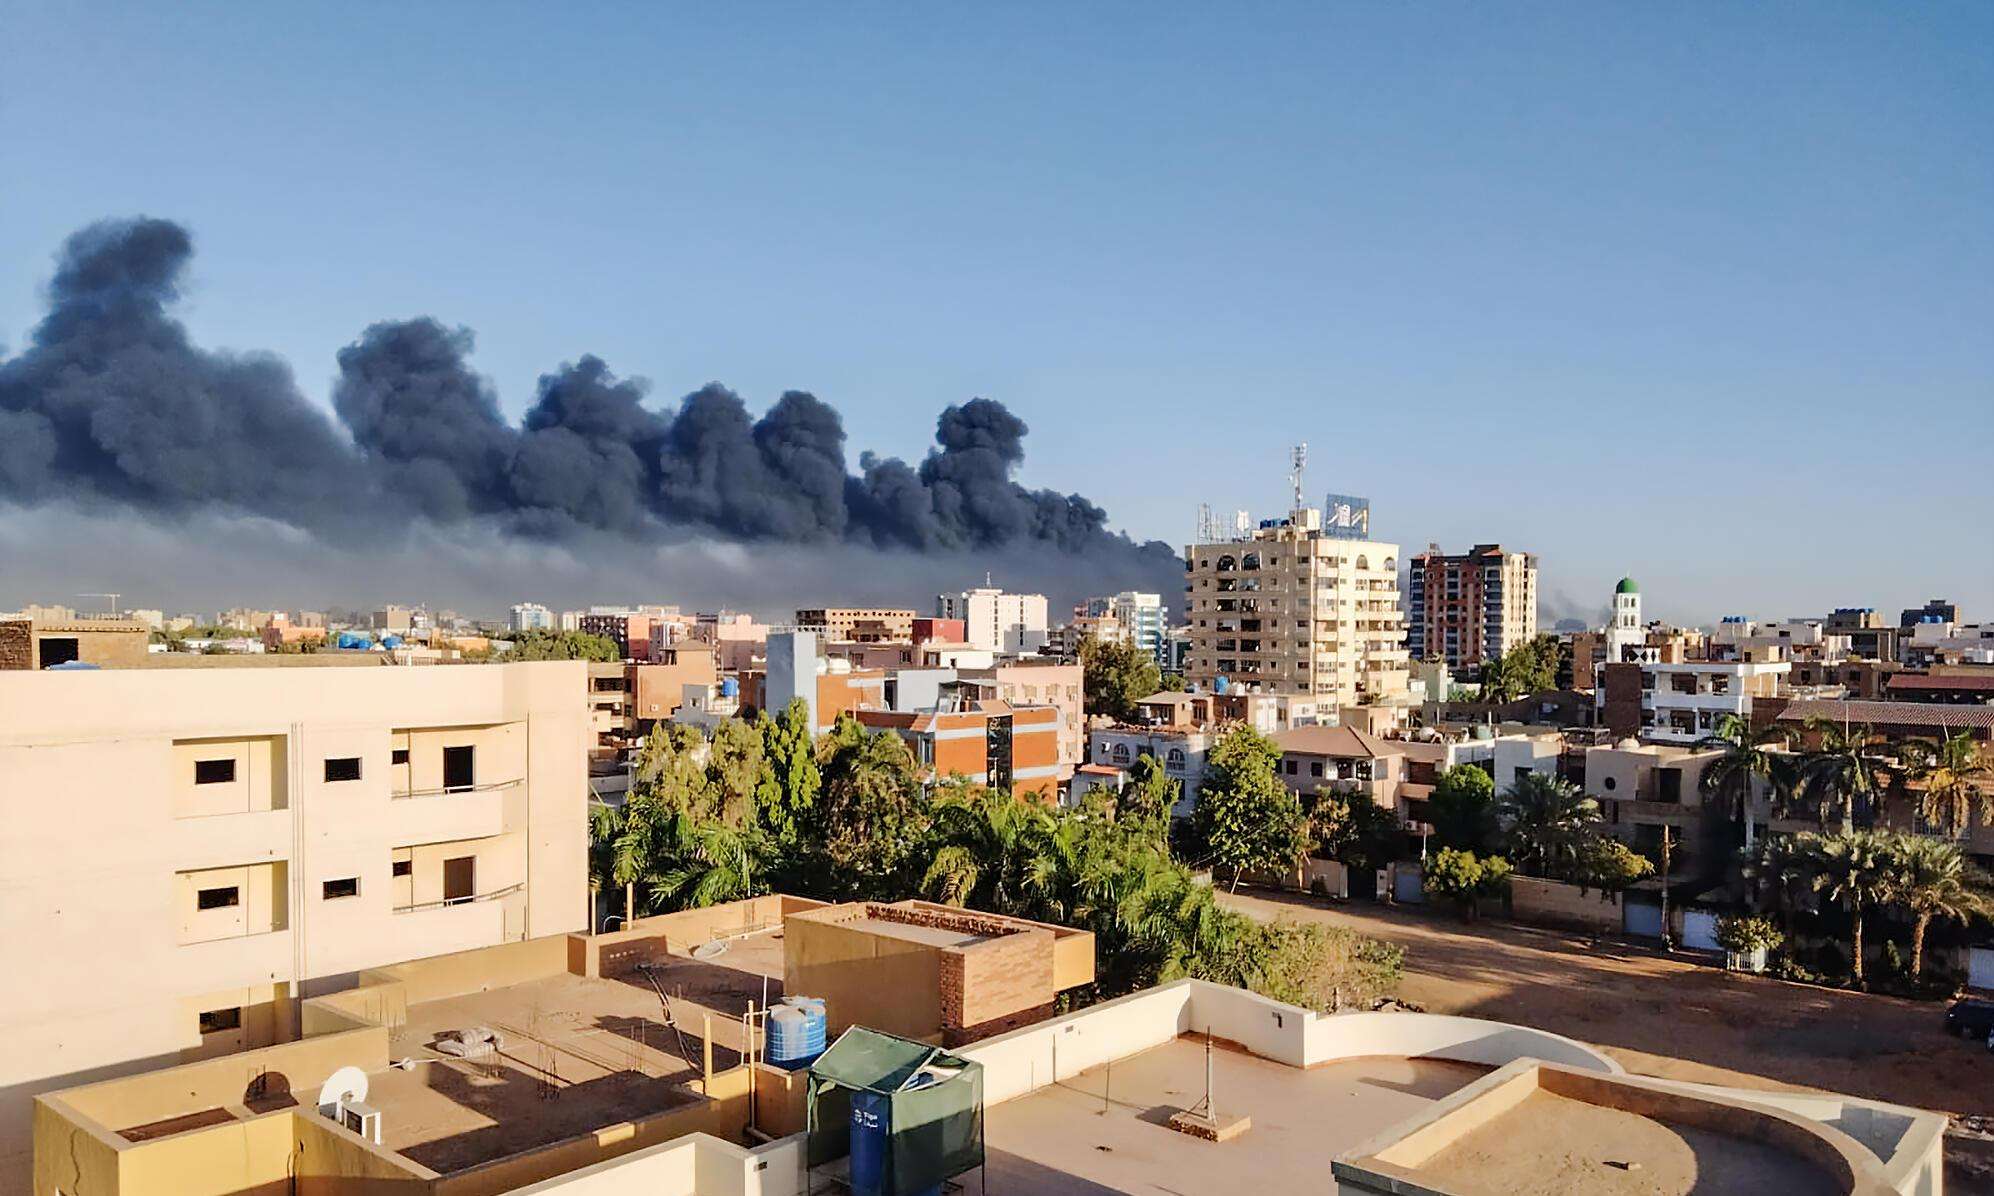 A scene of the city of Khartoum and a billowing fire in the background.